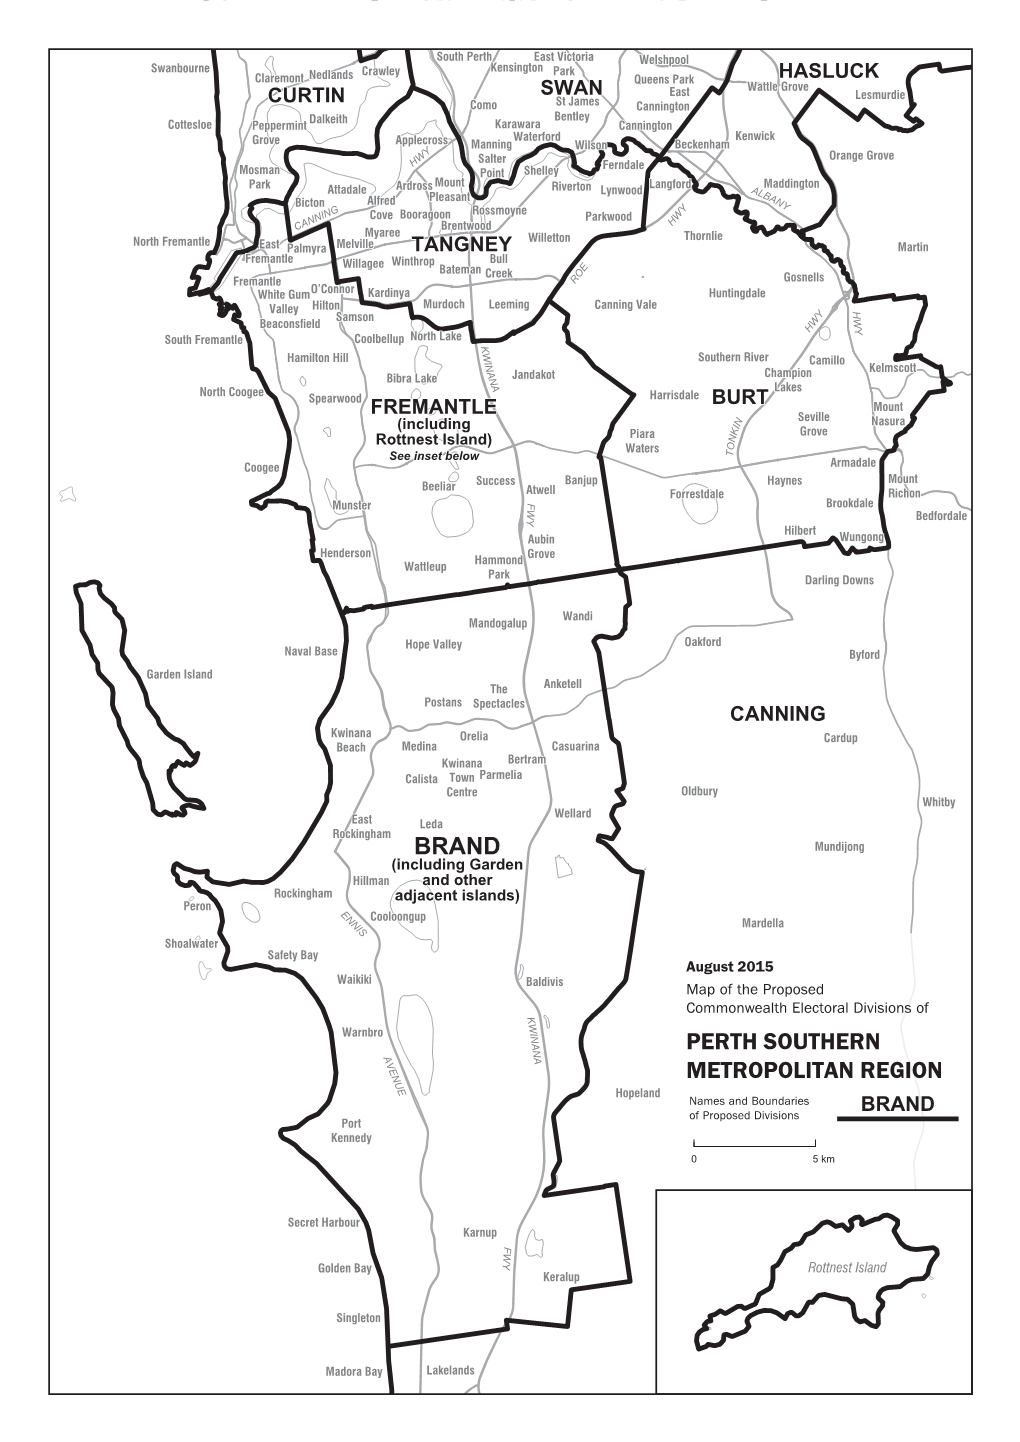 Proposed Federal Electoral Divisions in the Perth Southern Metropolitan